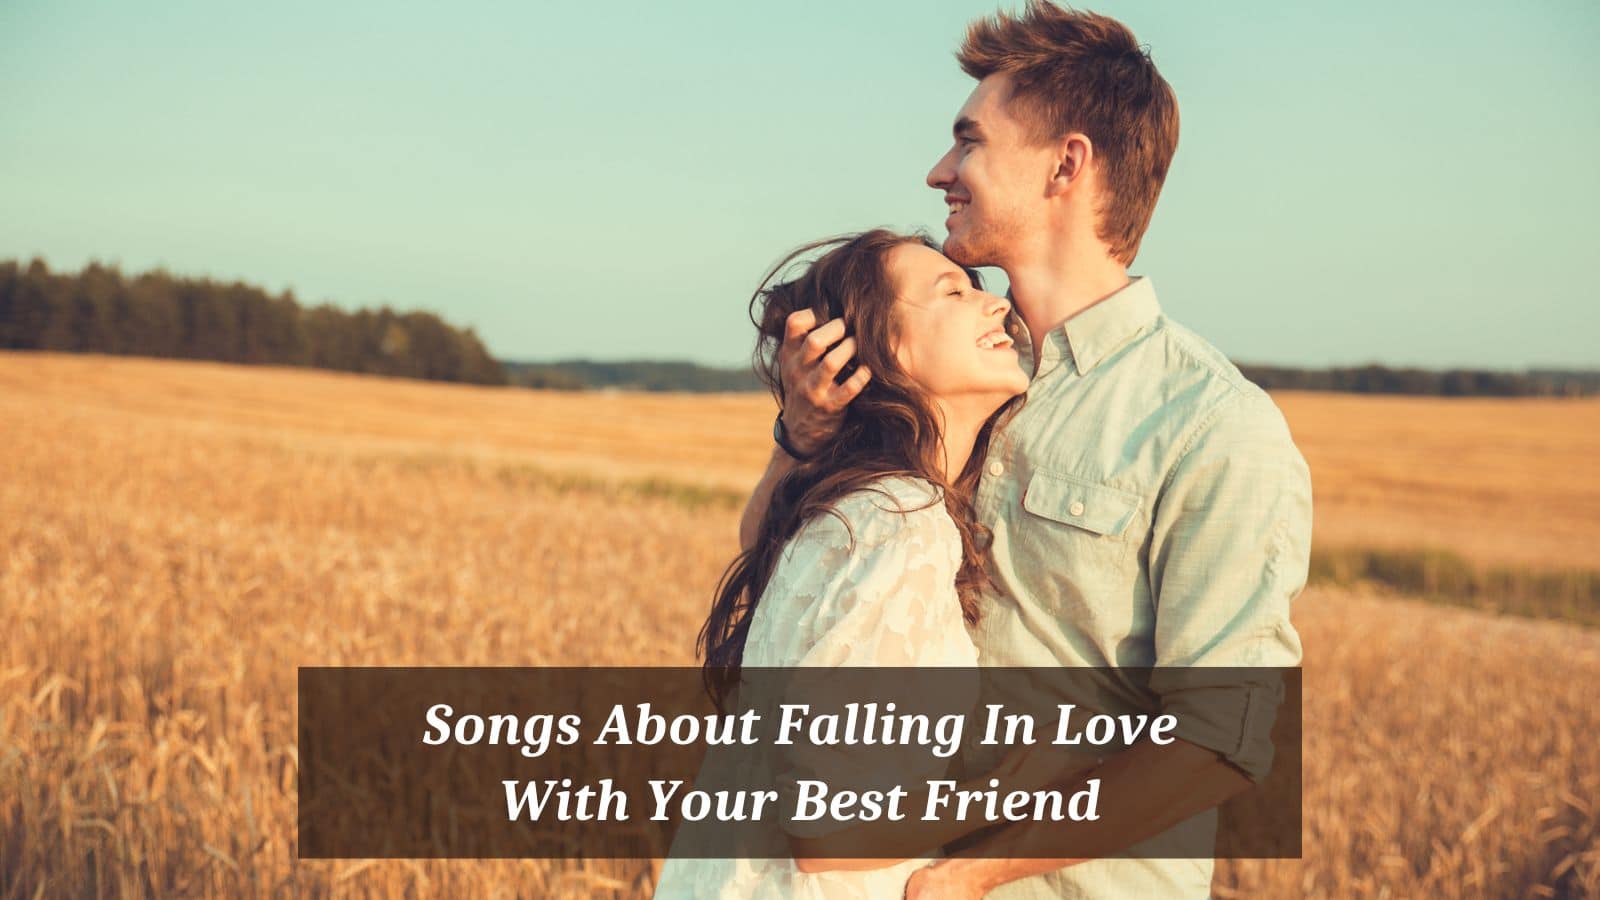 Songs About Falling In Love With Your Best Friend